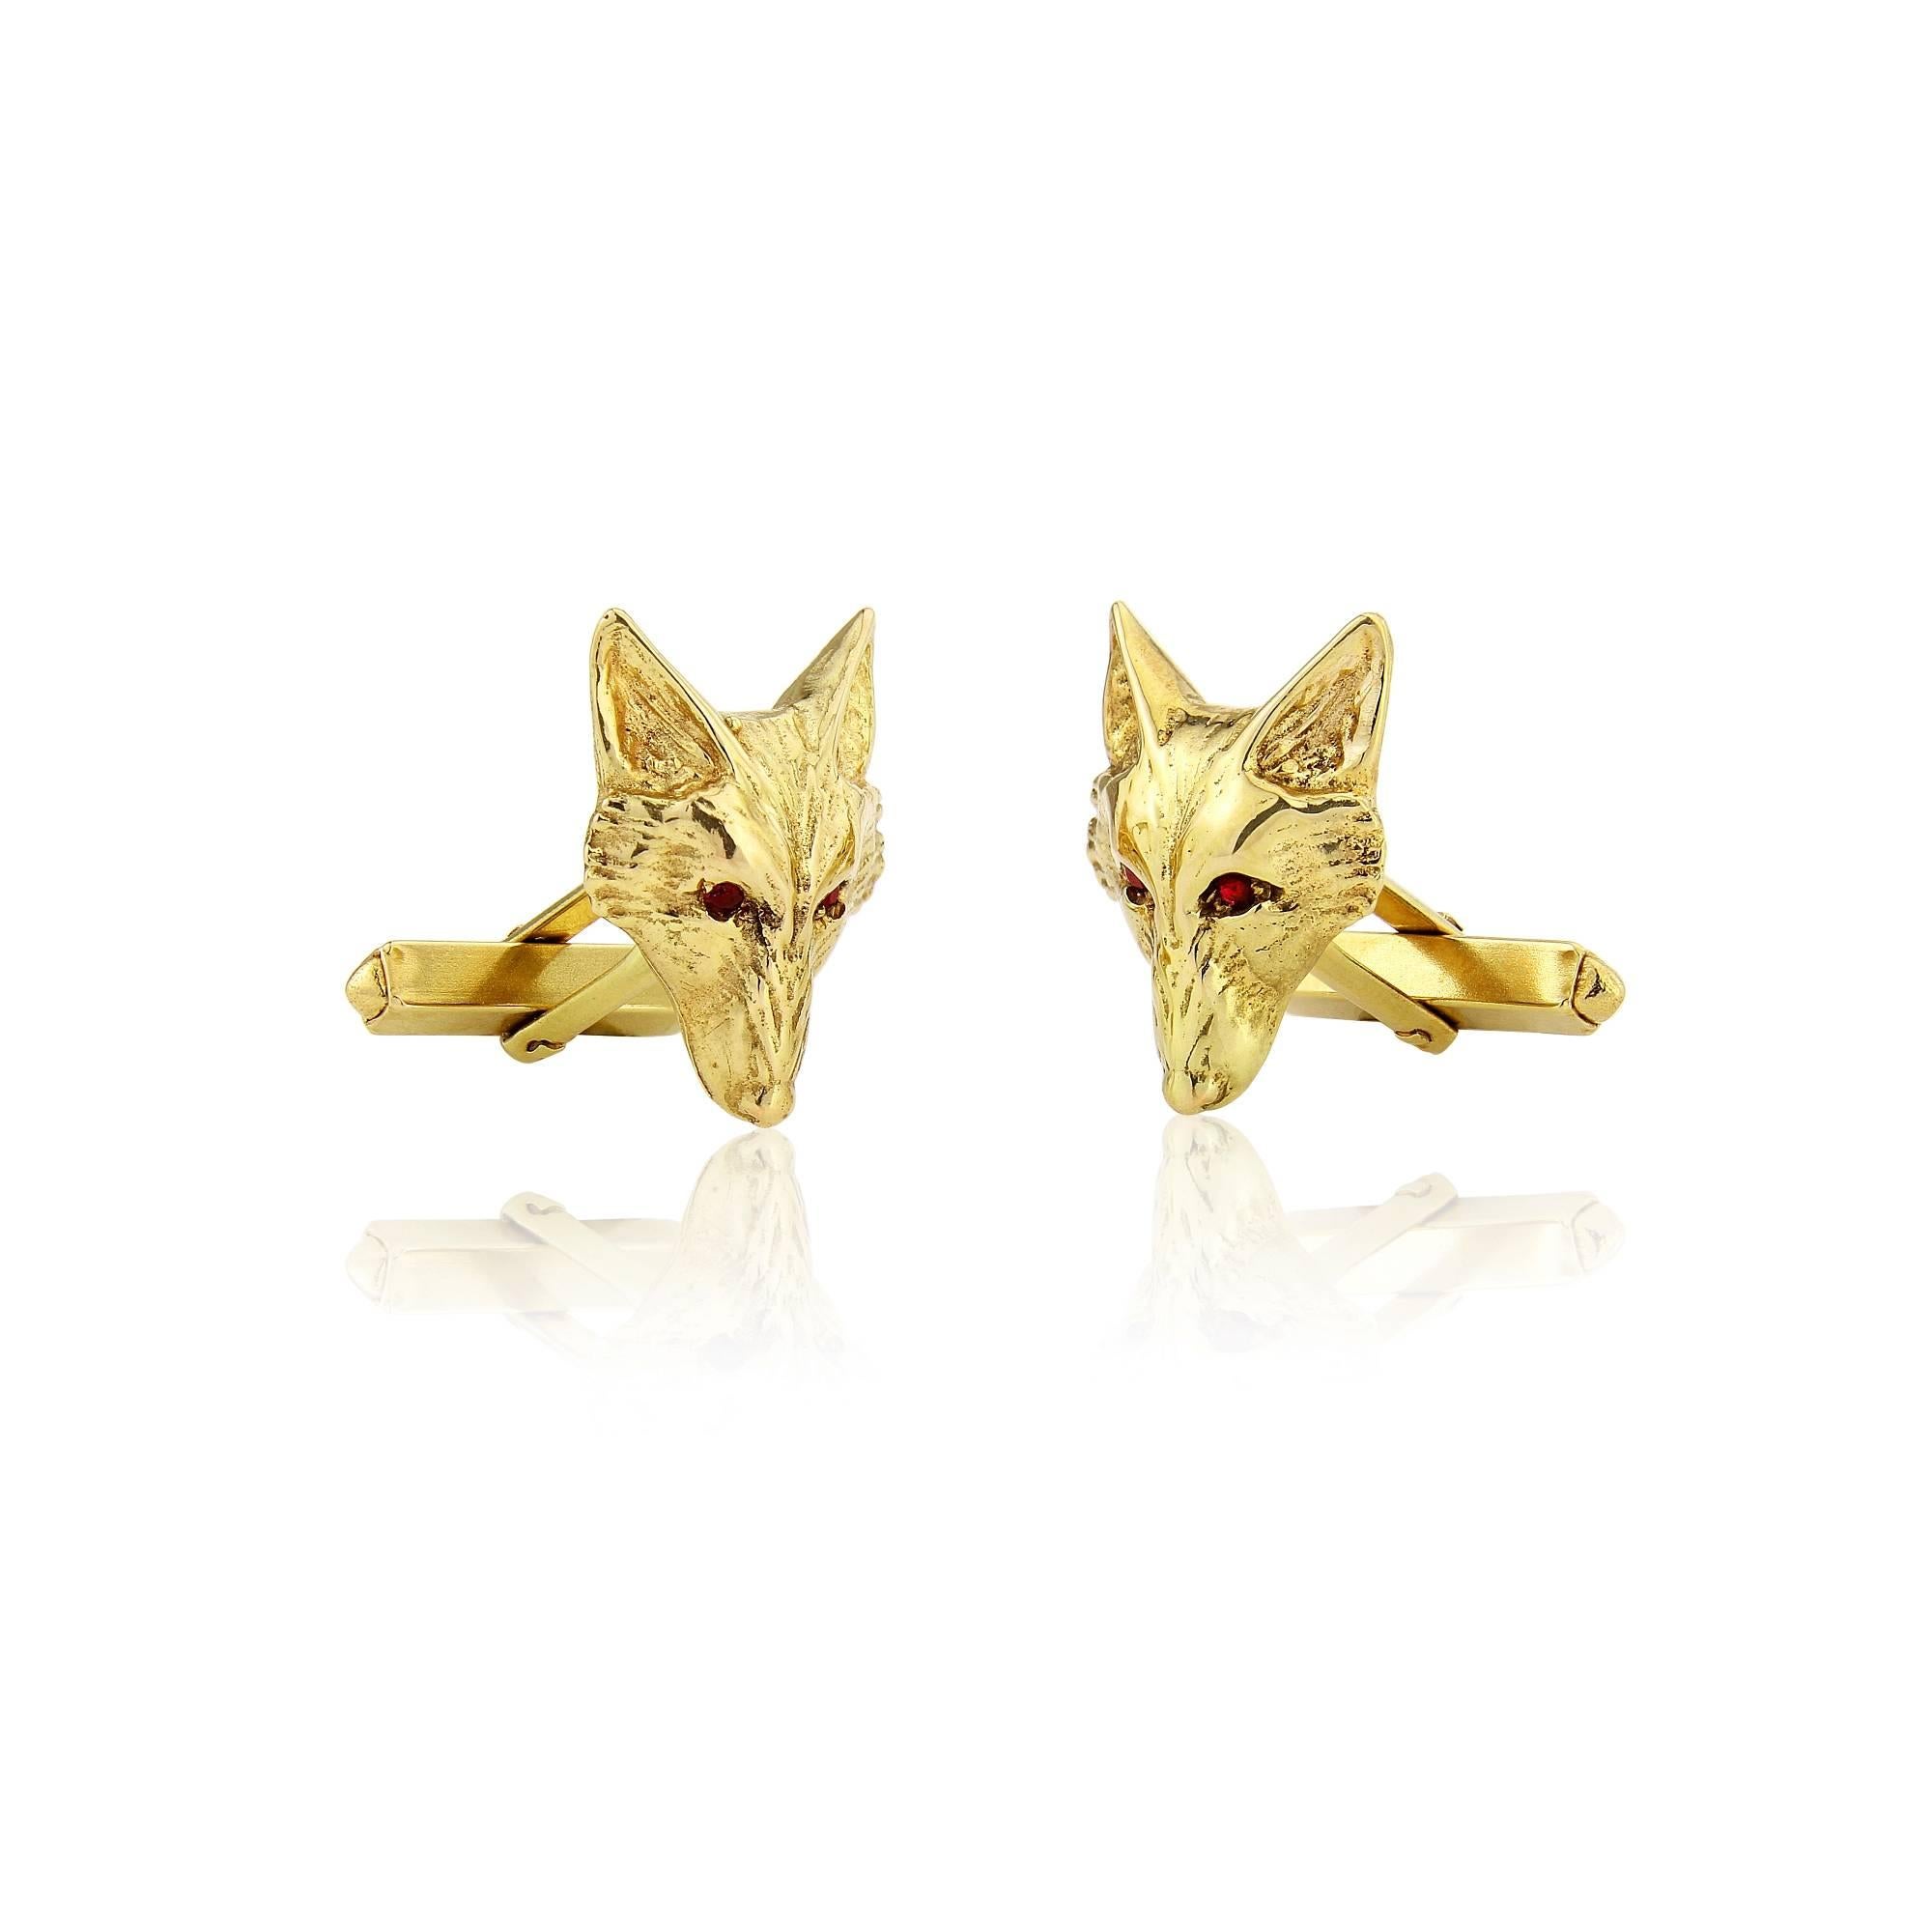 Fox Cufflinks from our Museum Wildlife Collection New for Fall